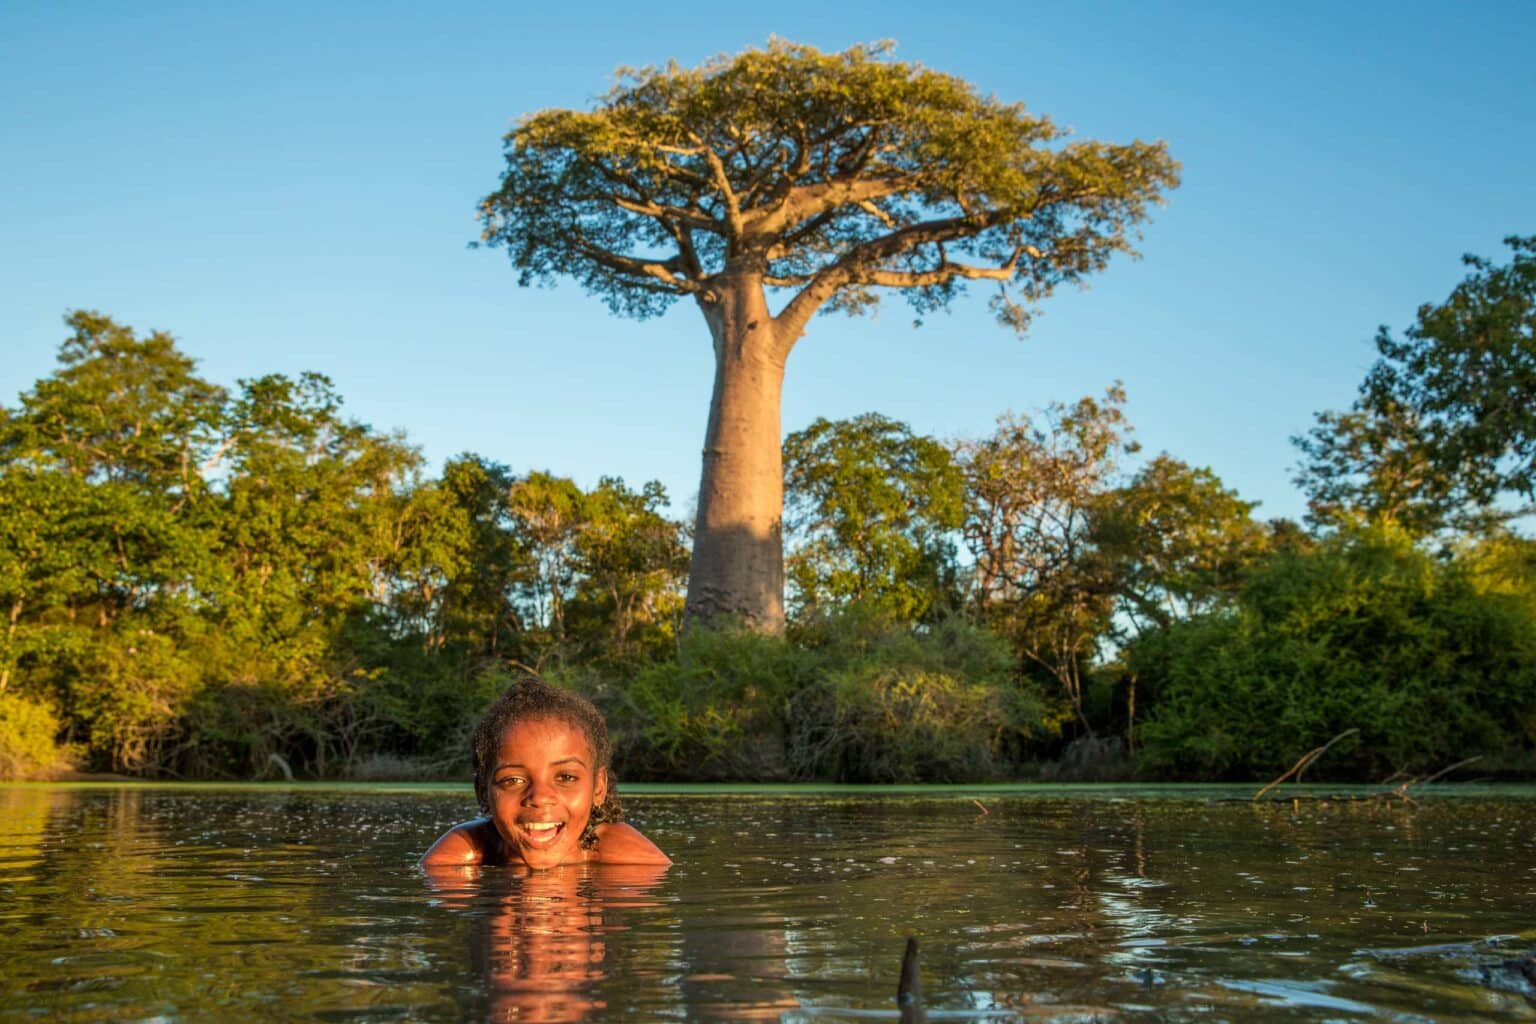 A young girl in a pond with a baobab tree in the background at sunset in Tulear Province.